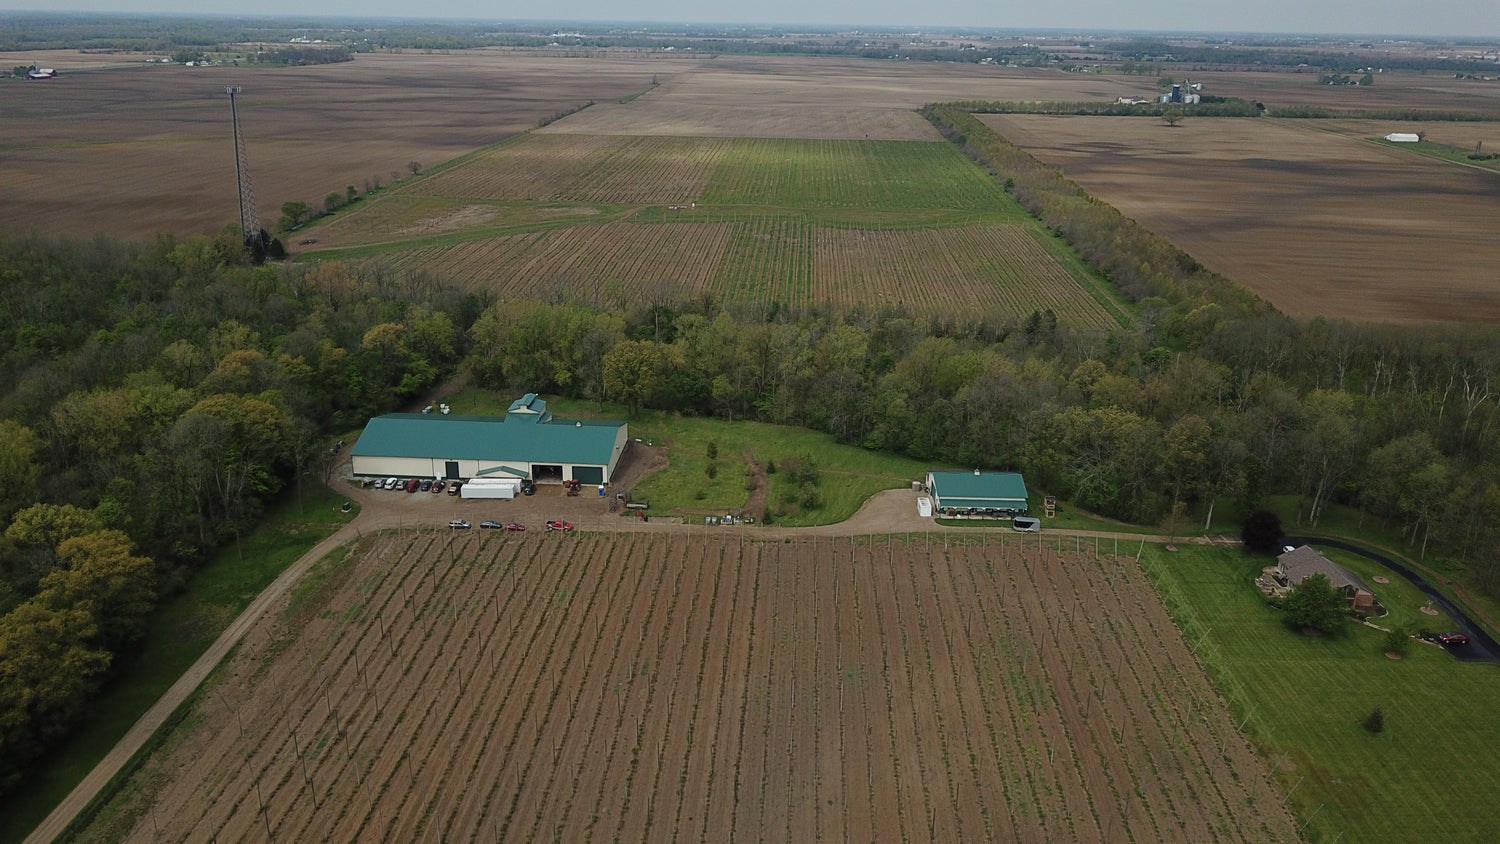 The farm grounds and buildings.